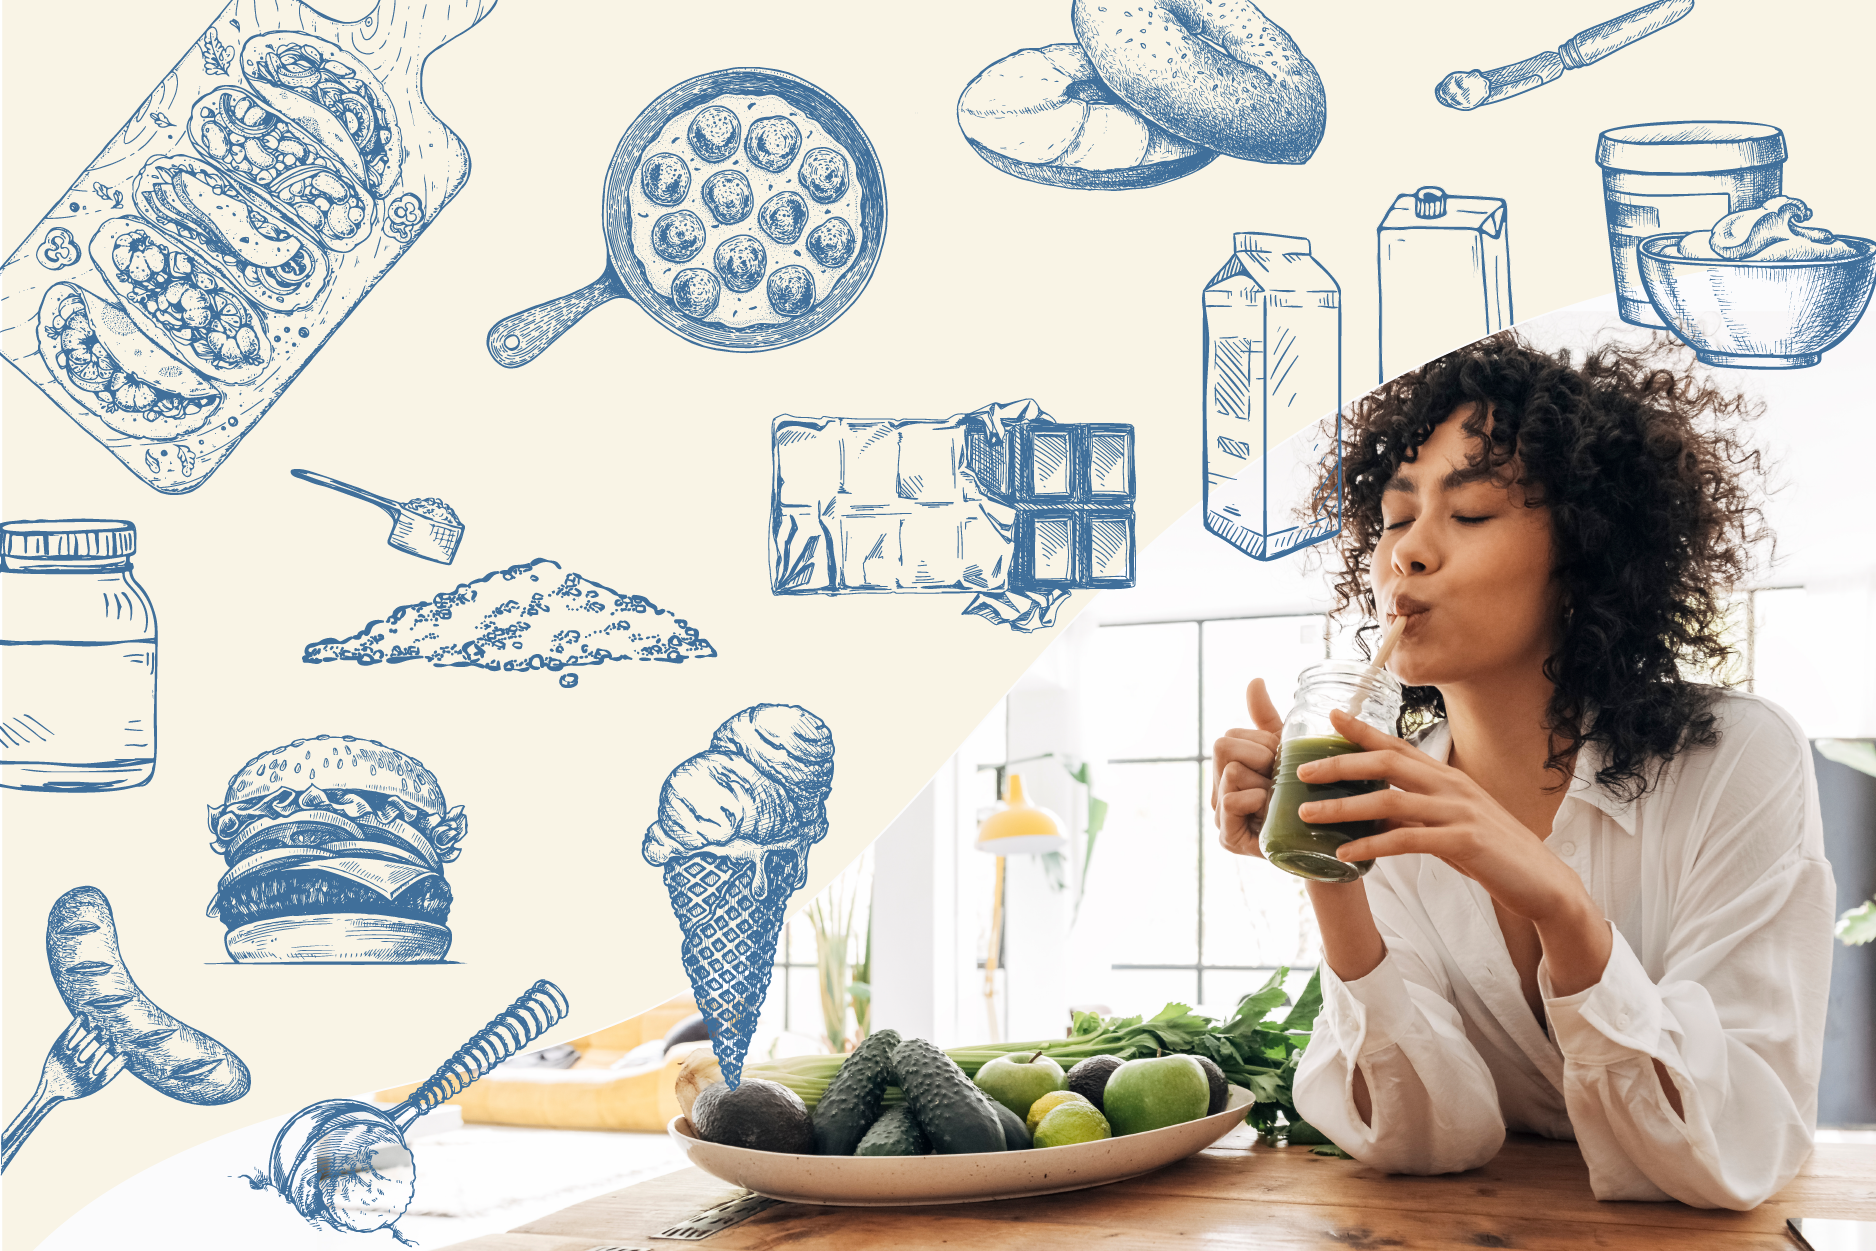 A young woman is seated at a table enjoying a healthy smoothie. There is a tray filled with fruit and vegetables on the table in front of her. The background shows illustrations of a variety of foods and dishes.the table